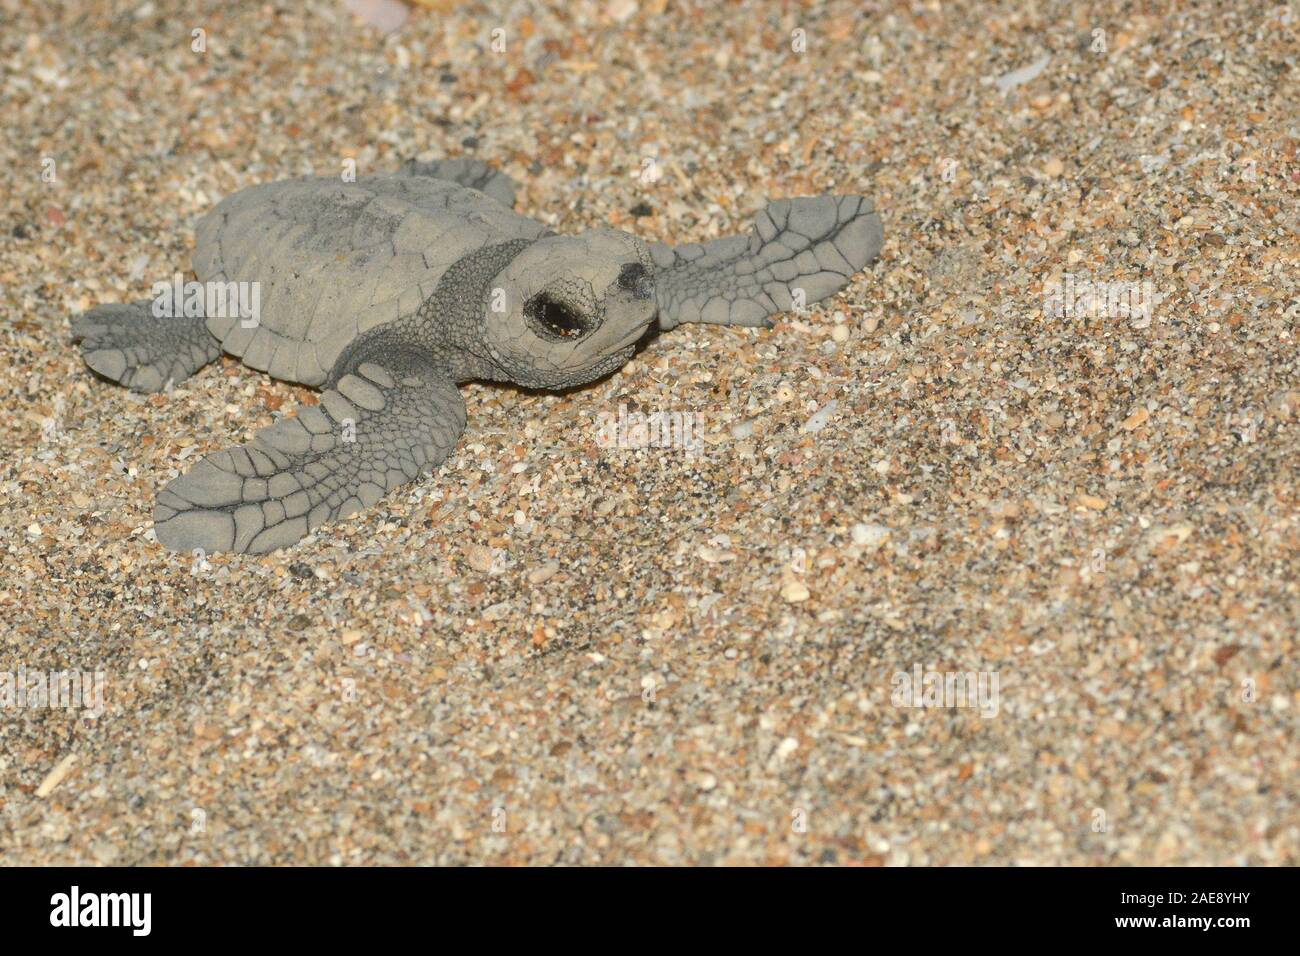 Green sea turtle, Chelonia mydas. Hatchling turtles struggle to reach the relative safety of the ocean,  Bali, Indonesia. Stock Photo